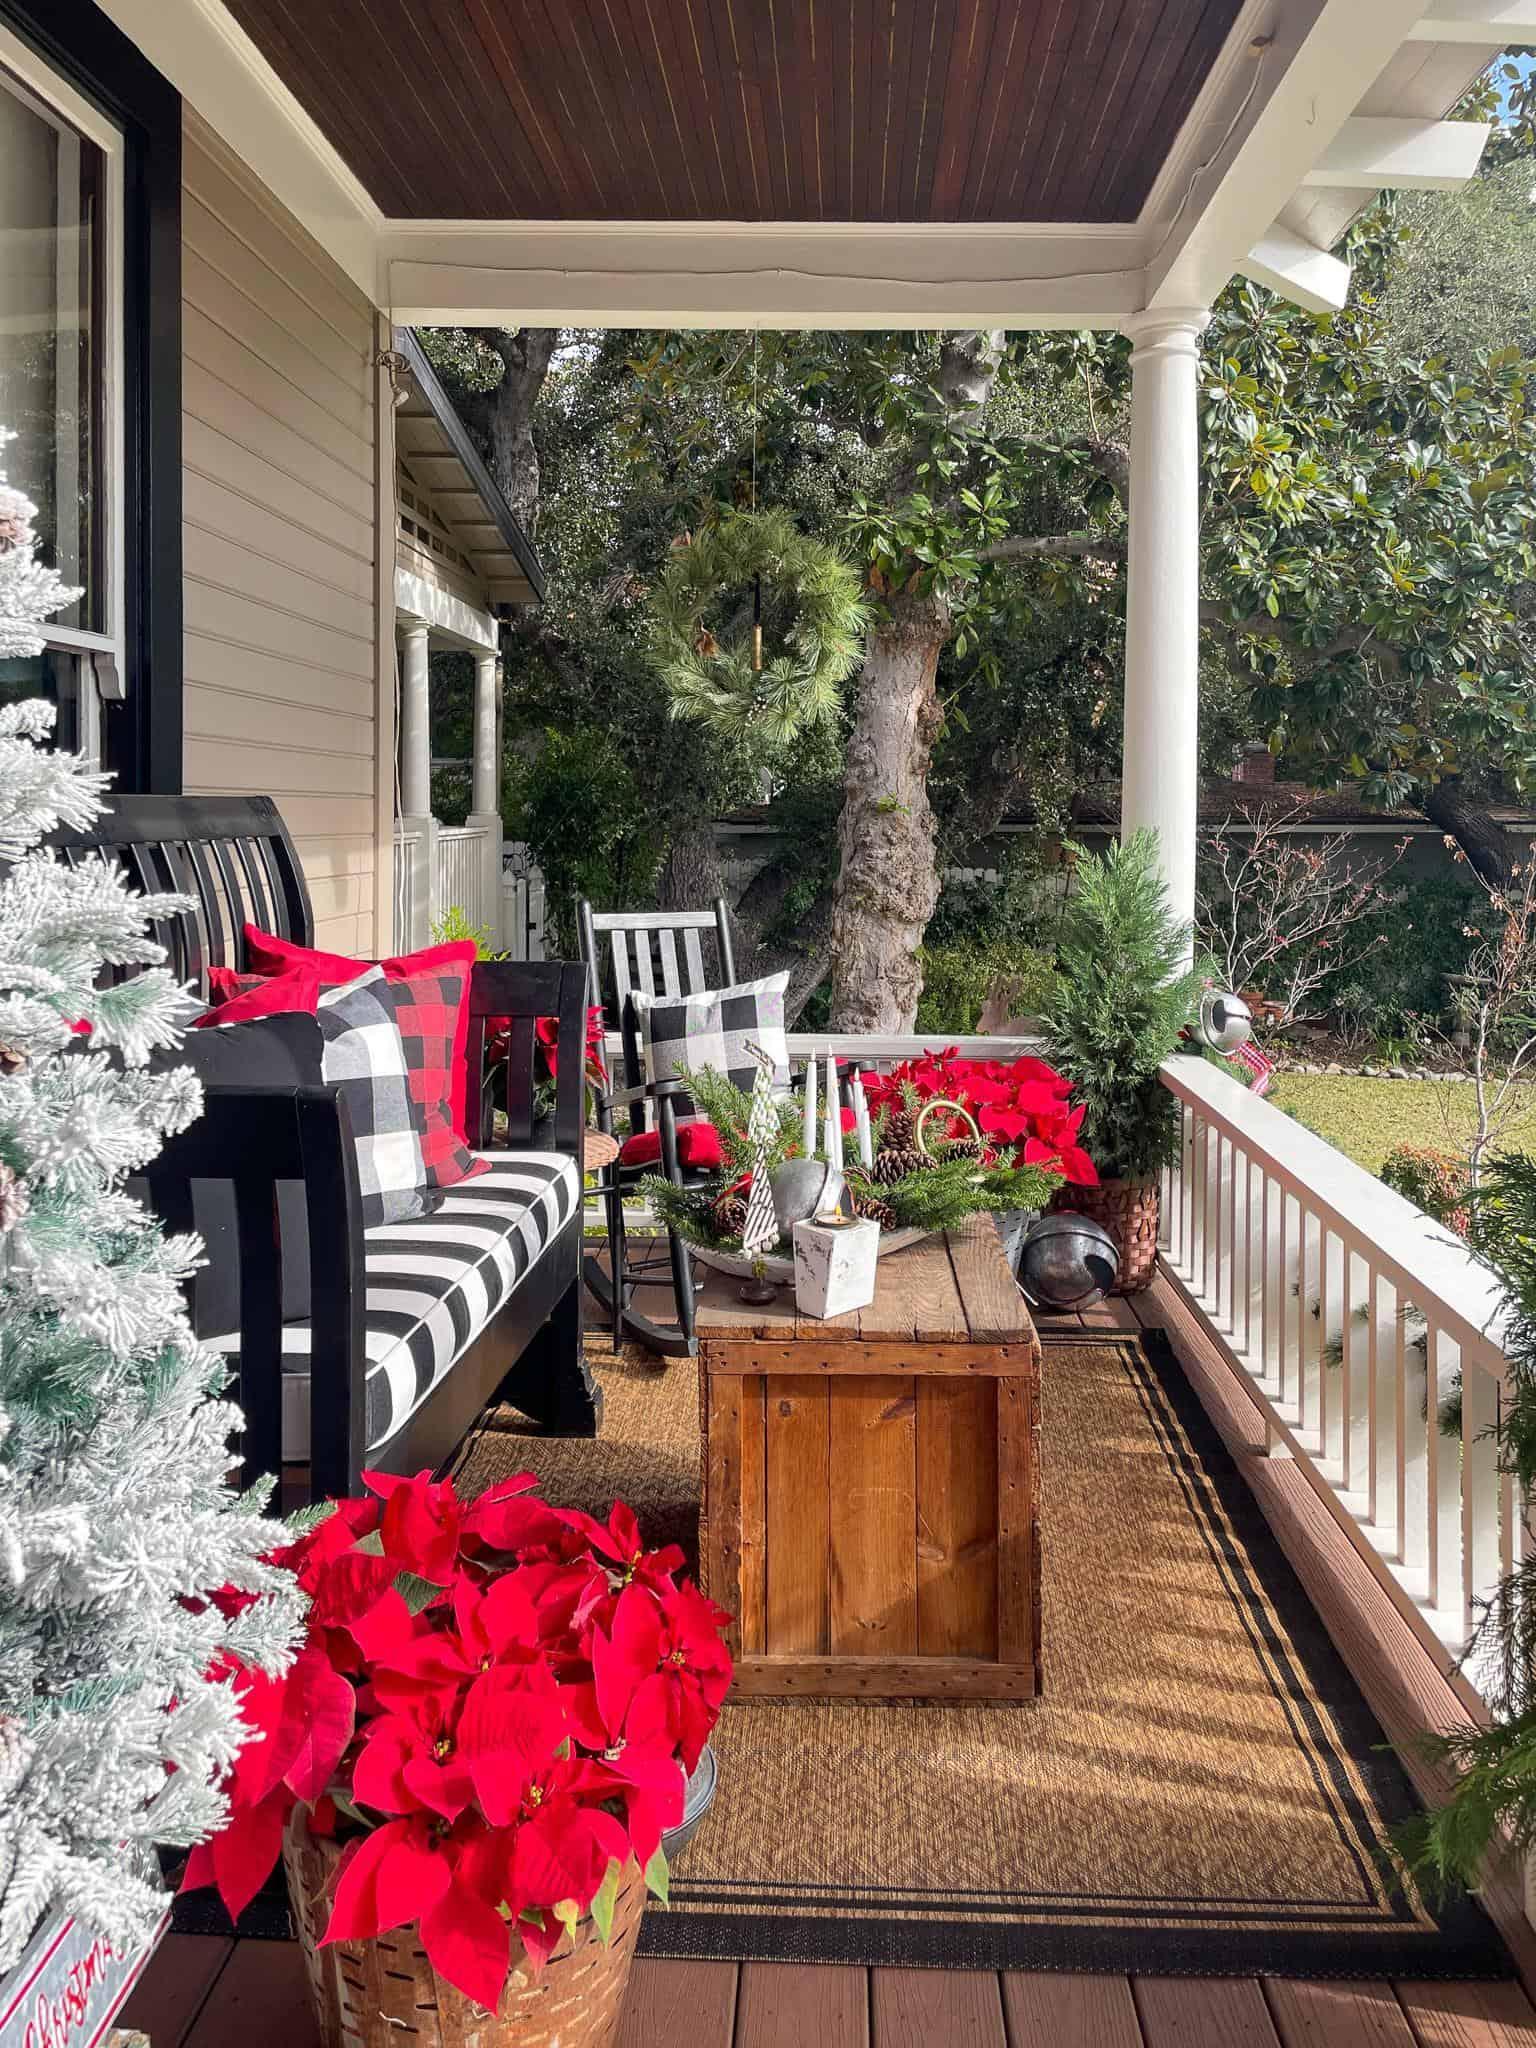 How to Create Beautiful Outdoor Christmas Porch Decorations